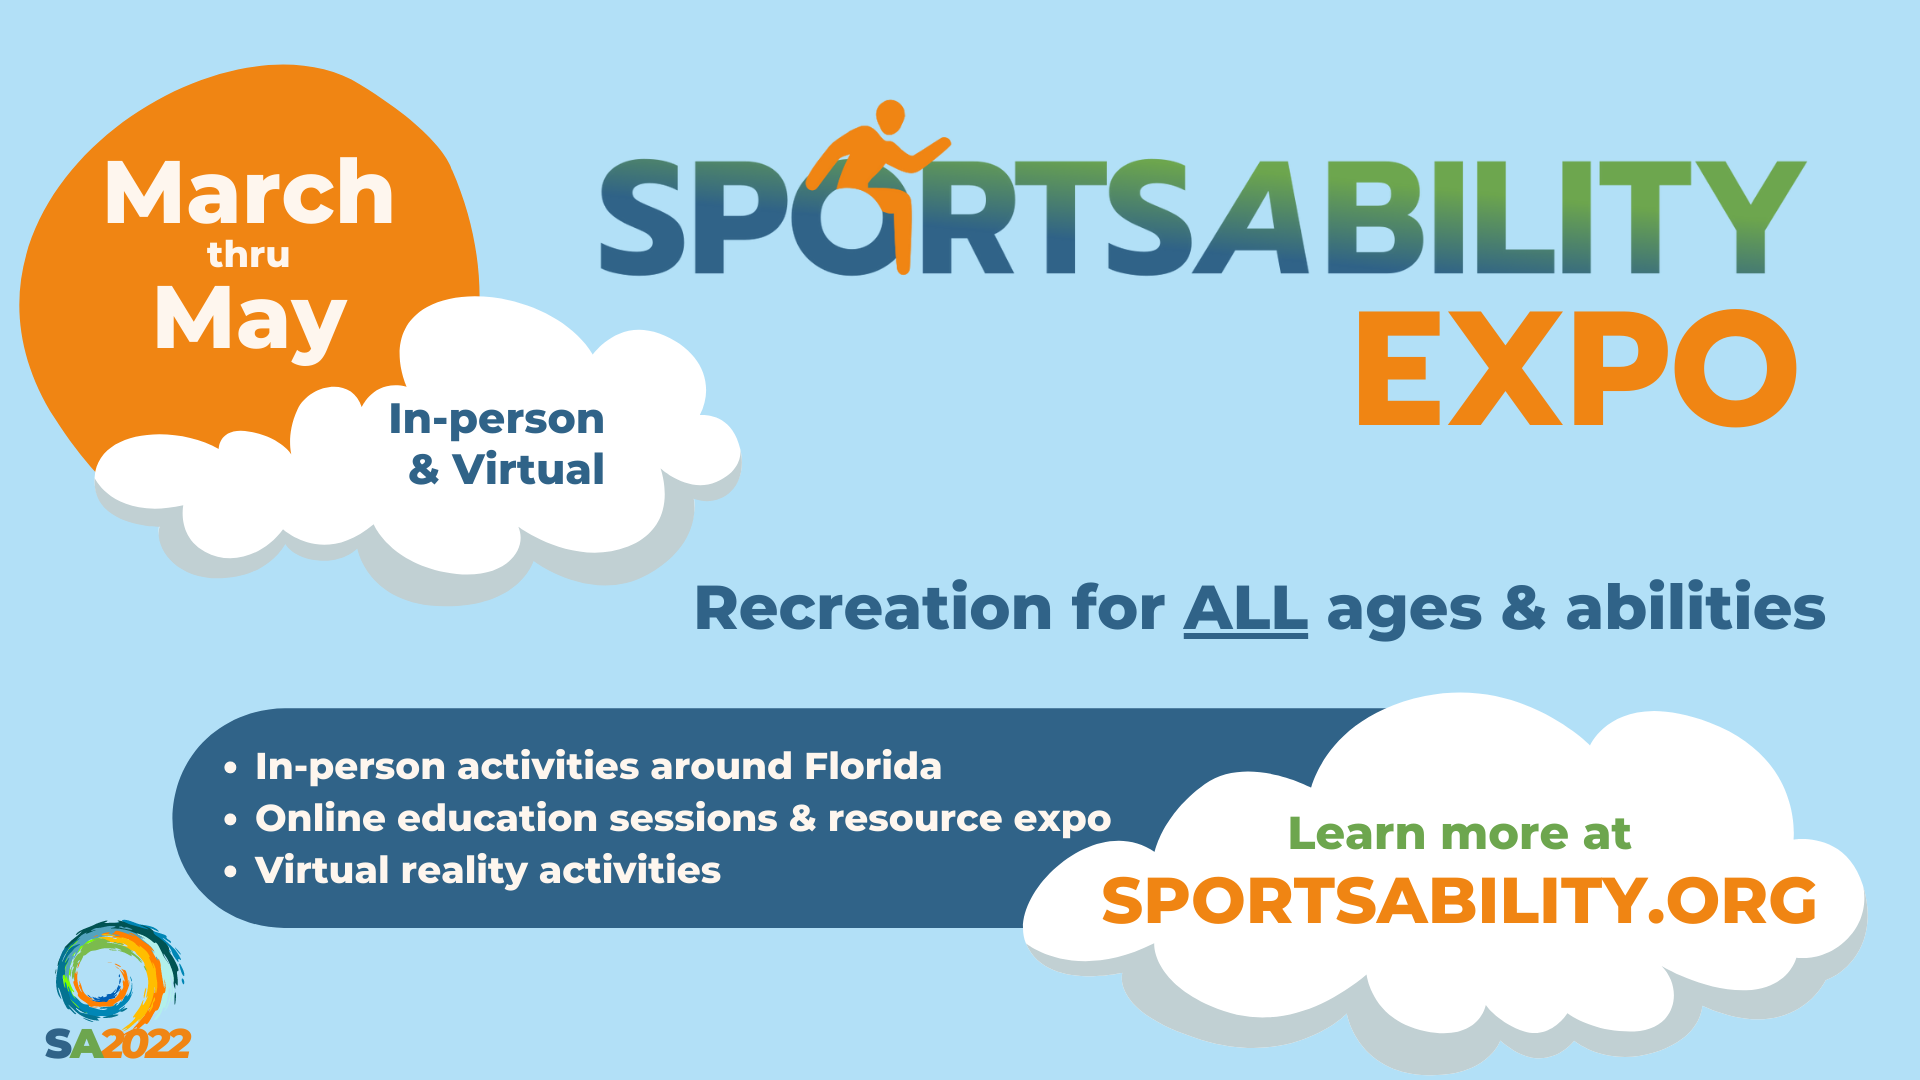 SportsAbility Expo 2022 Overview